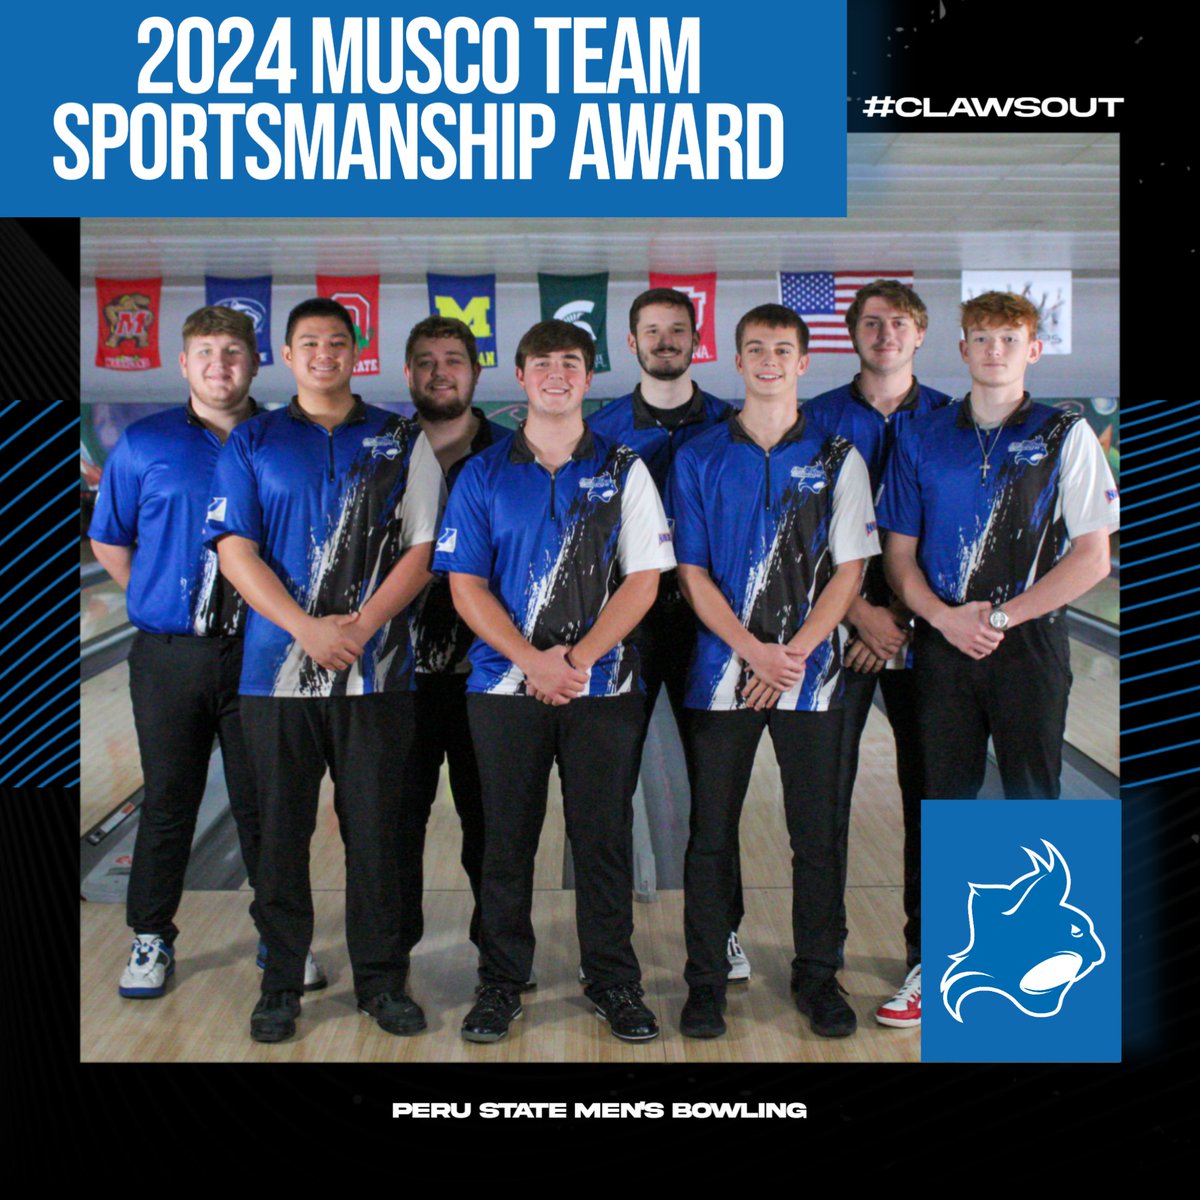 Congratulations to our Men's Bowling Team on earning the Musco Sportsmanship Award! #ClawsOut